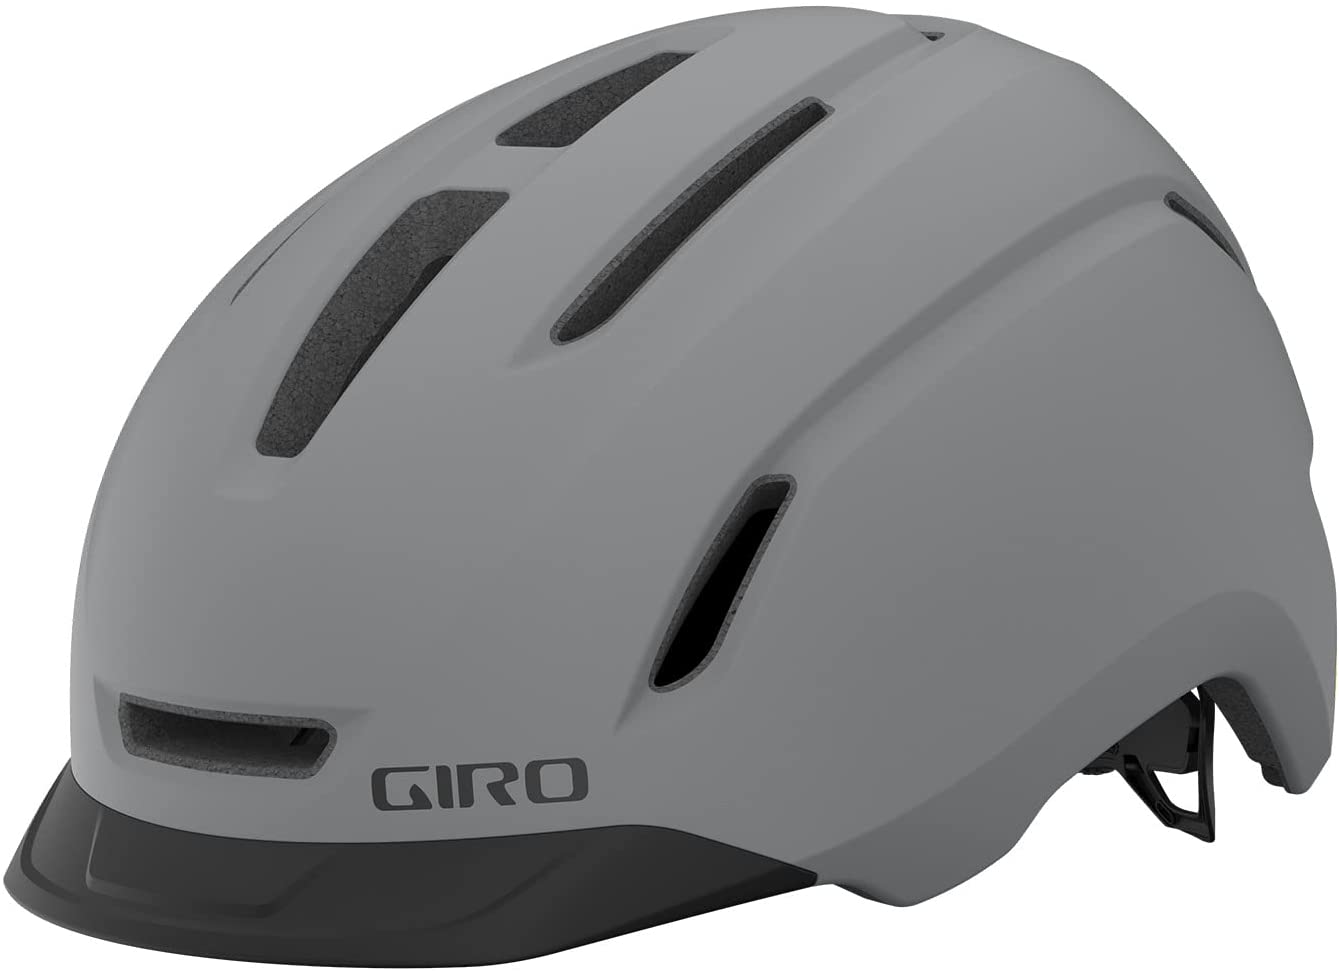 A Giro bike helmet that links to Amazon page when clicked.